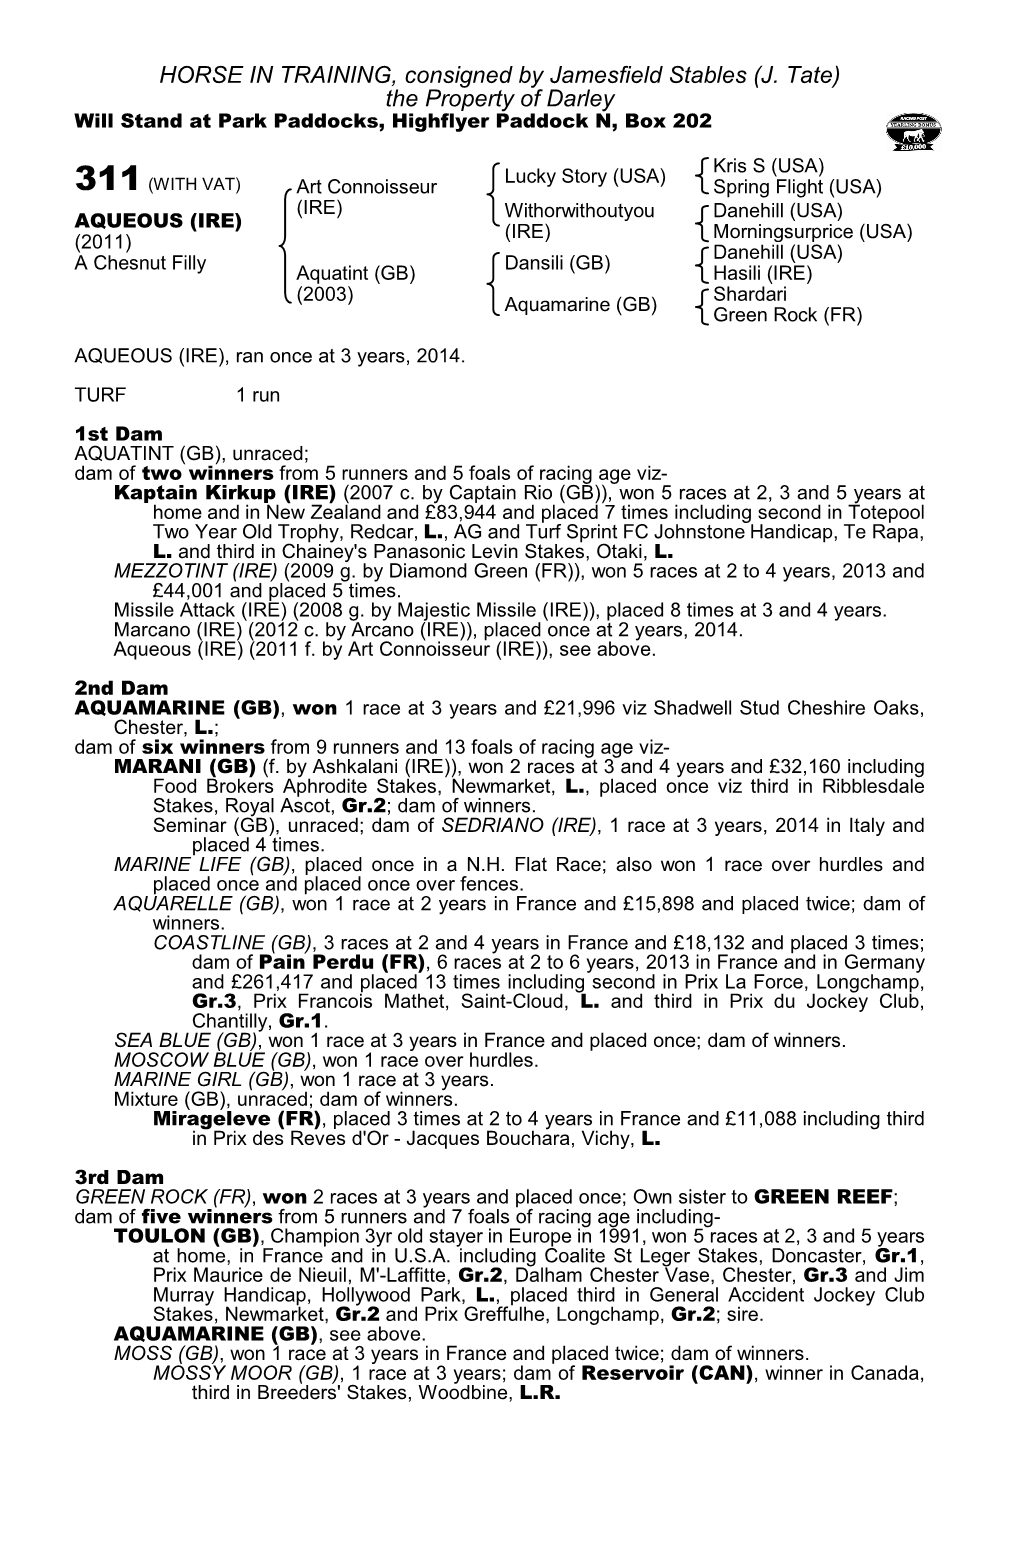 HORSE in TRAINING, Consigned by Jamesfield Stables (J. Tate) the Property of Darley Will Stand at Park Paddocks, Highflyer Paddock N, Box 202